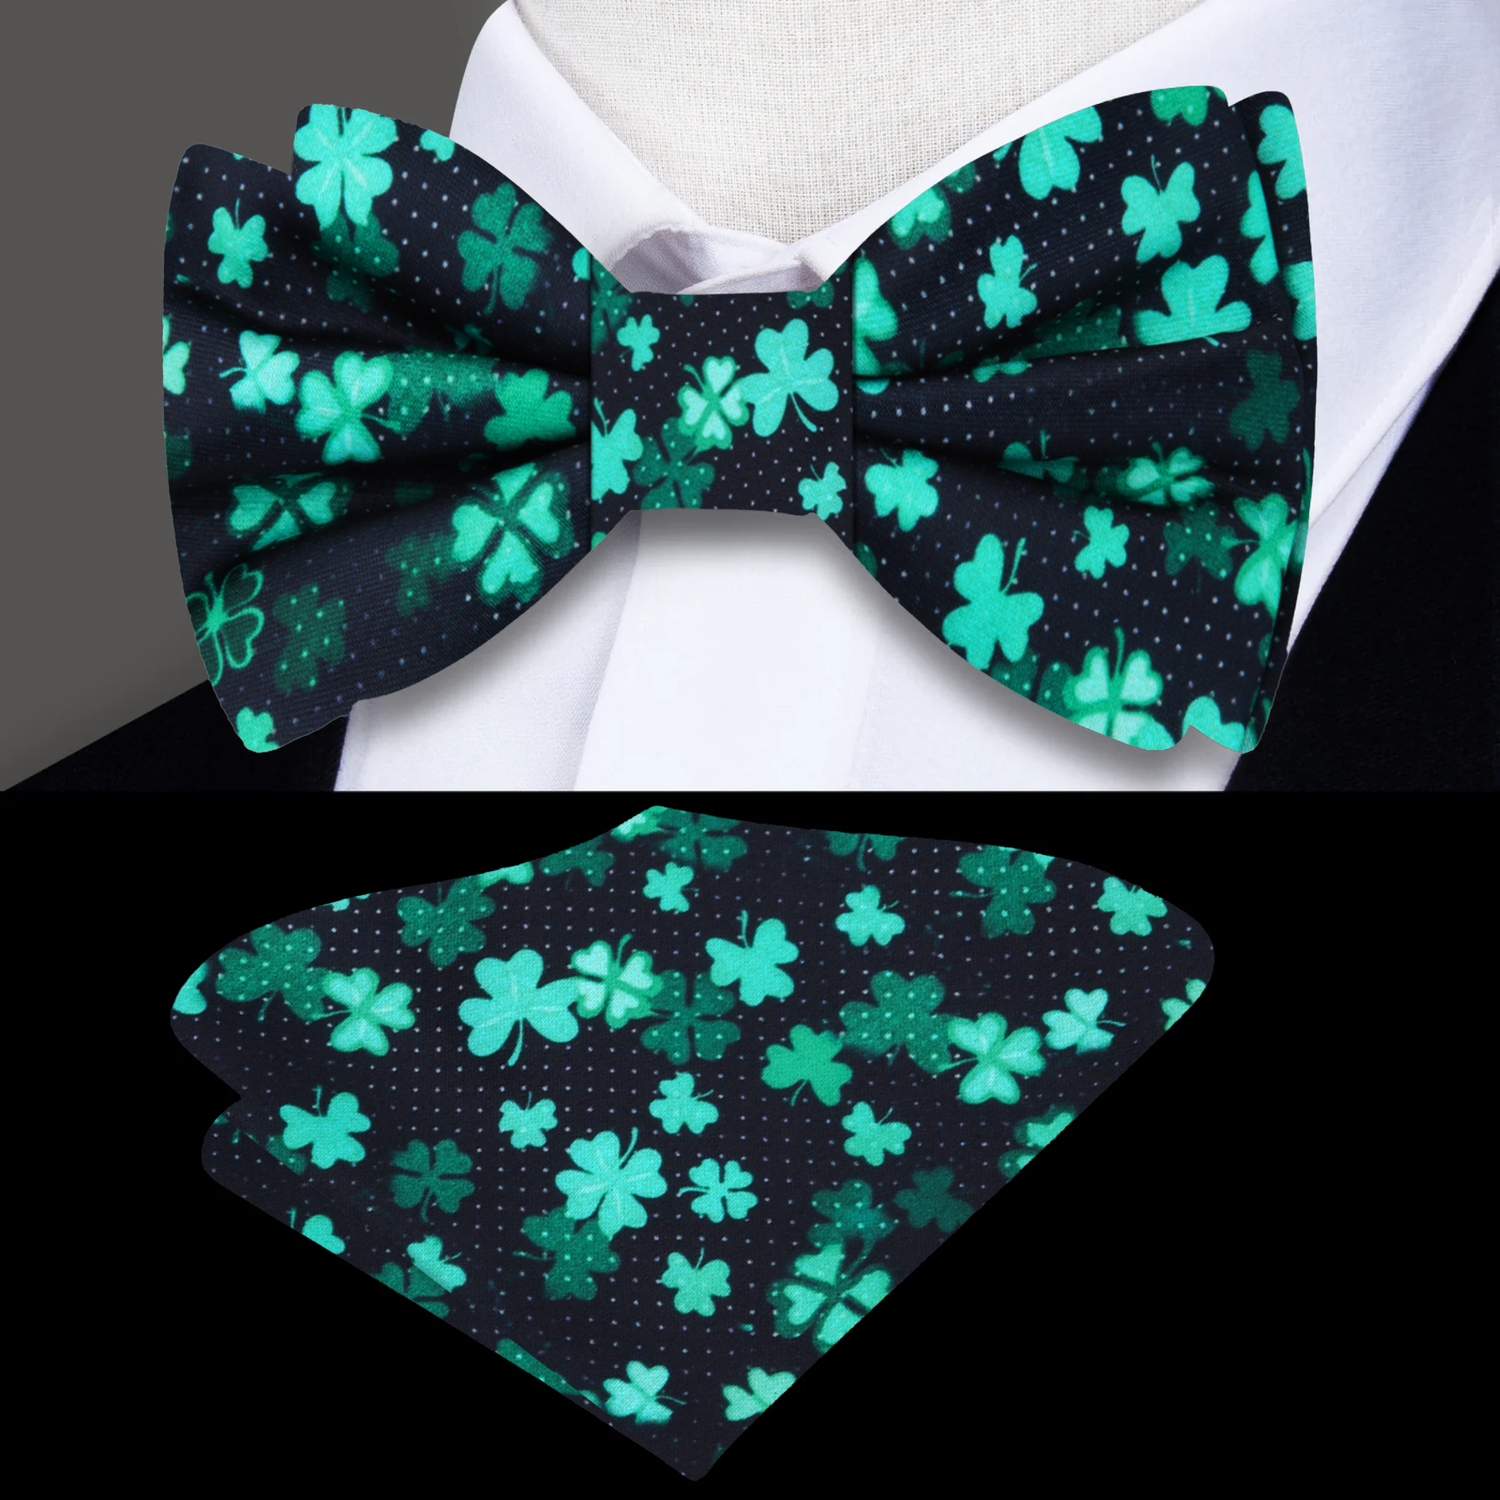 Black and Green Four Leaf Clovers Bow Tie and Square